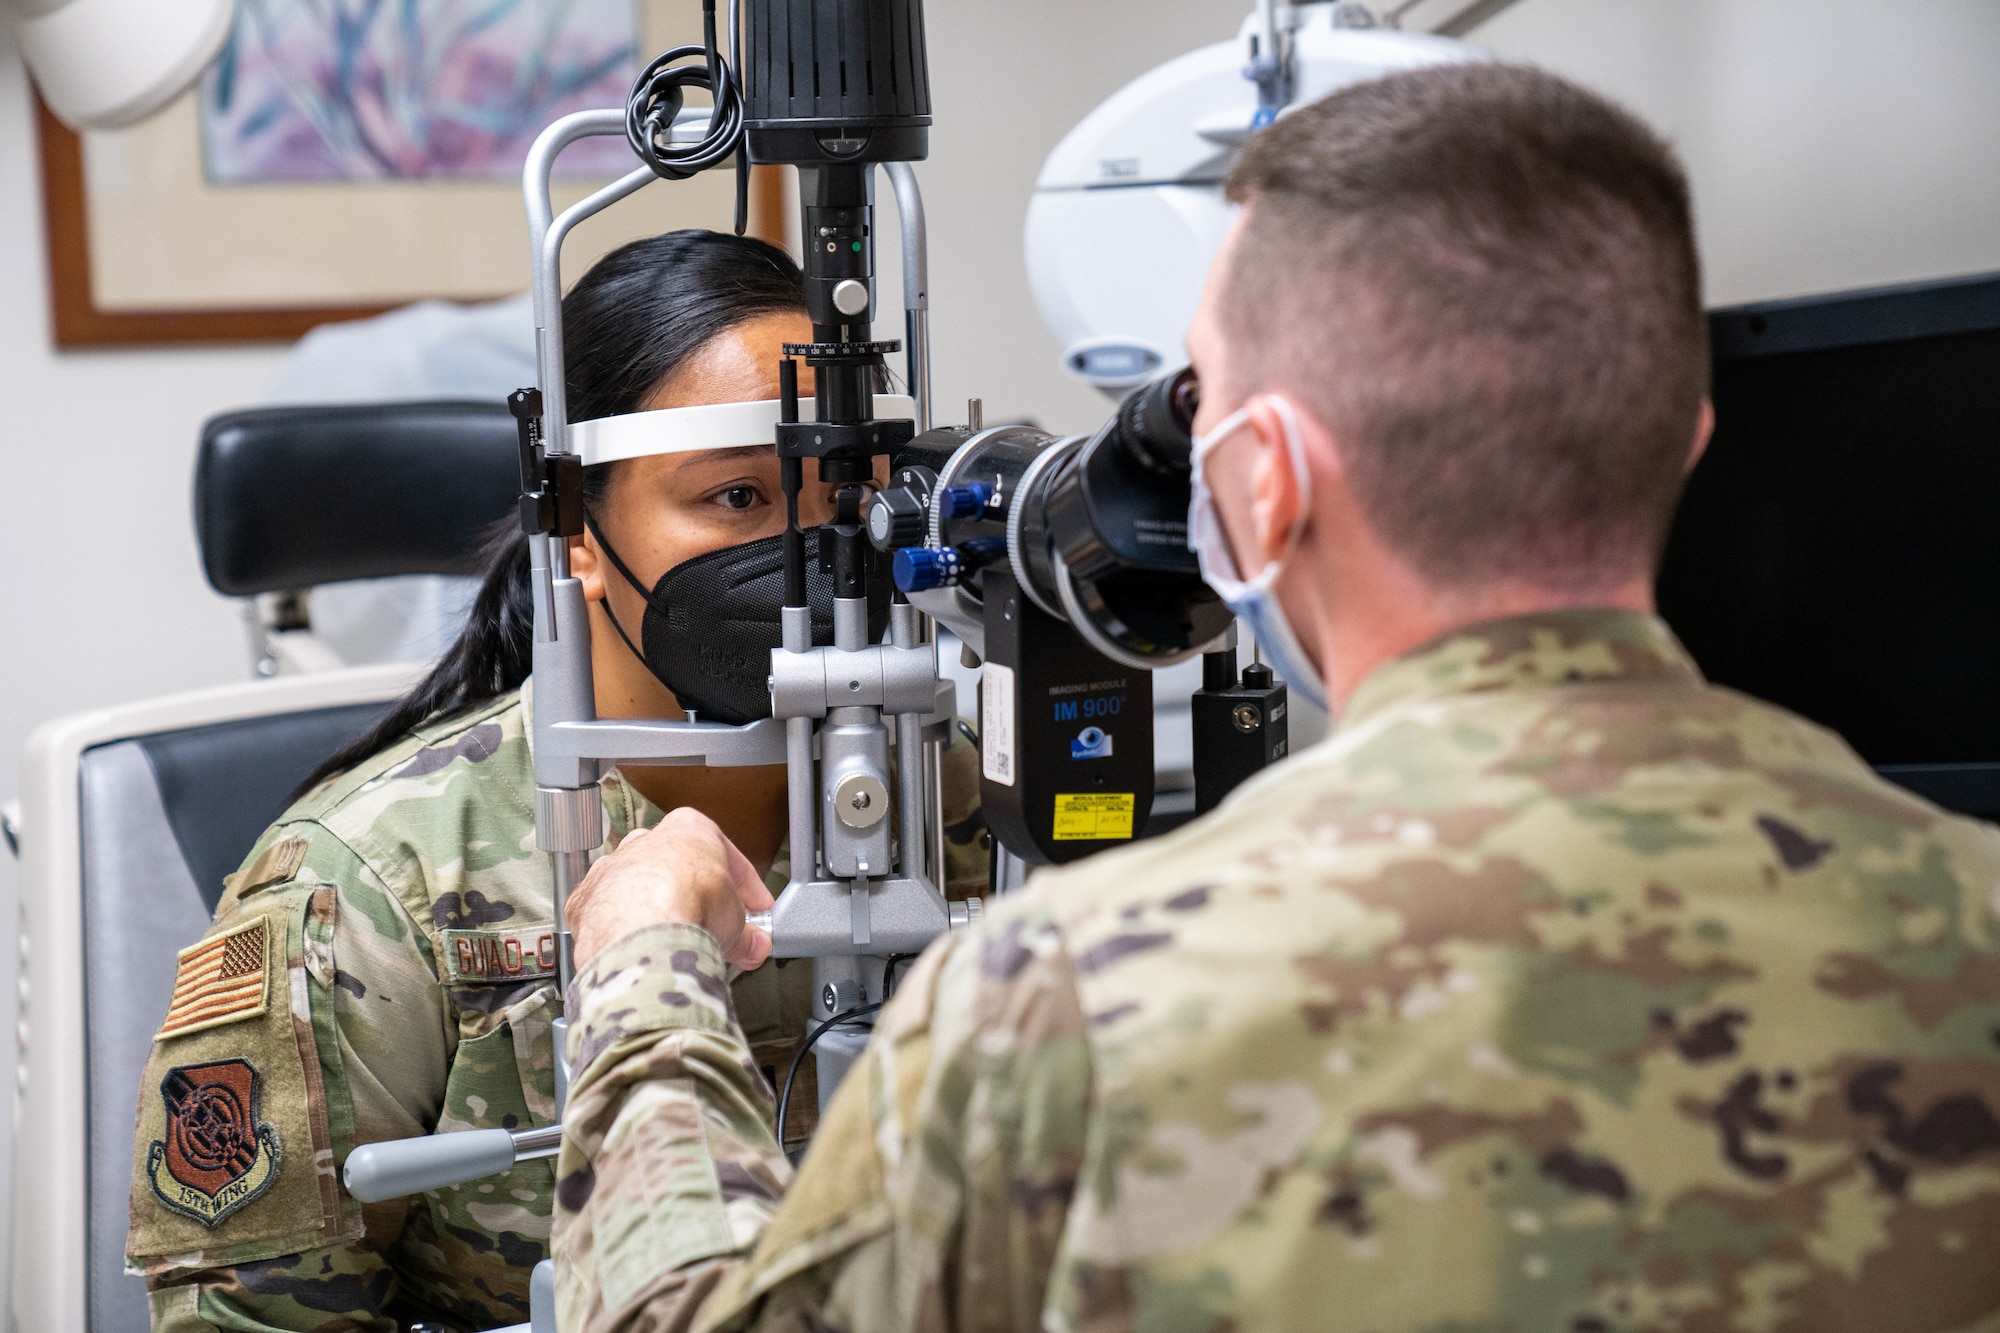 Capt. Dominic Rentz, 15th Operational Medical Readiness Squadron optometrist, examines the eyes of 1st Lt. Denise Guaio-Corpuz, 15th Wing Public Affairs chief, during a routine eye exam at Joint Base Pearl Harbor-Hickam, Hawaii, April 19, 2022. Optometry technicians aid in the diagnosis of eye disorders and help assist Airmen with glasses, while playing an integral part in helping patients with their eye health. (U.S. Air Force photo by Airman 1st Class Makensie Cooper)